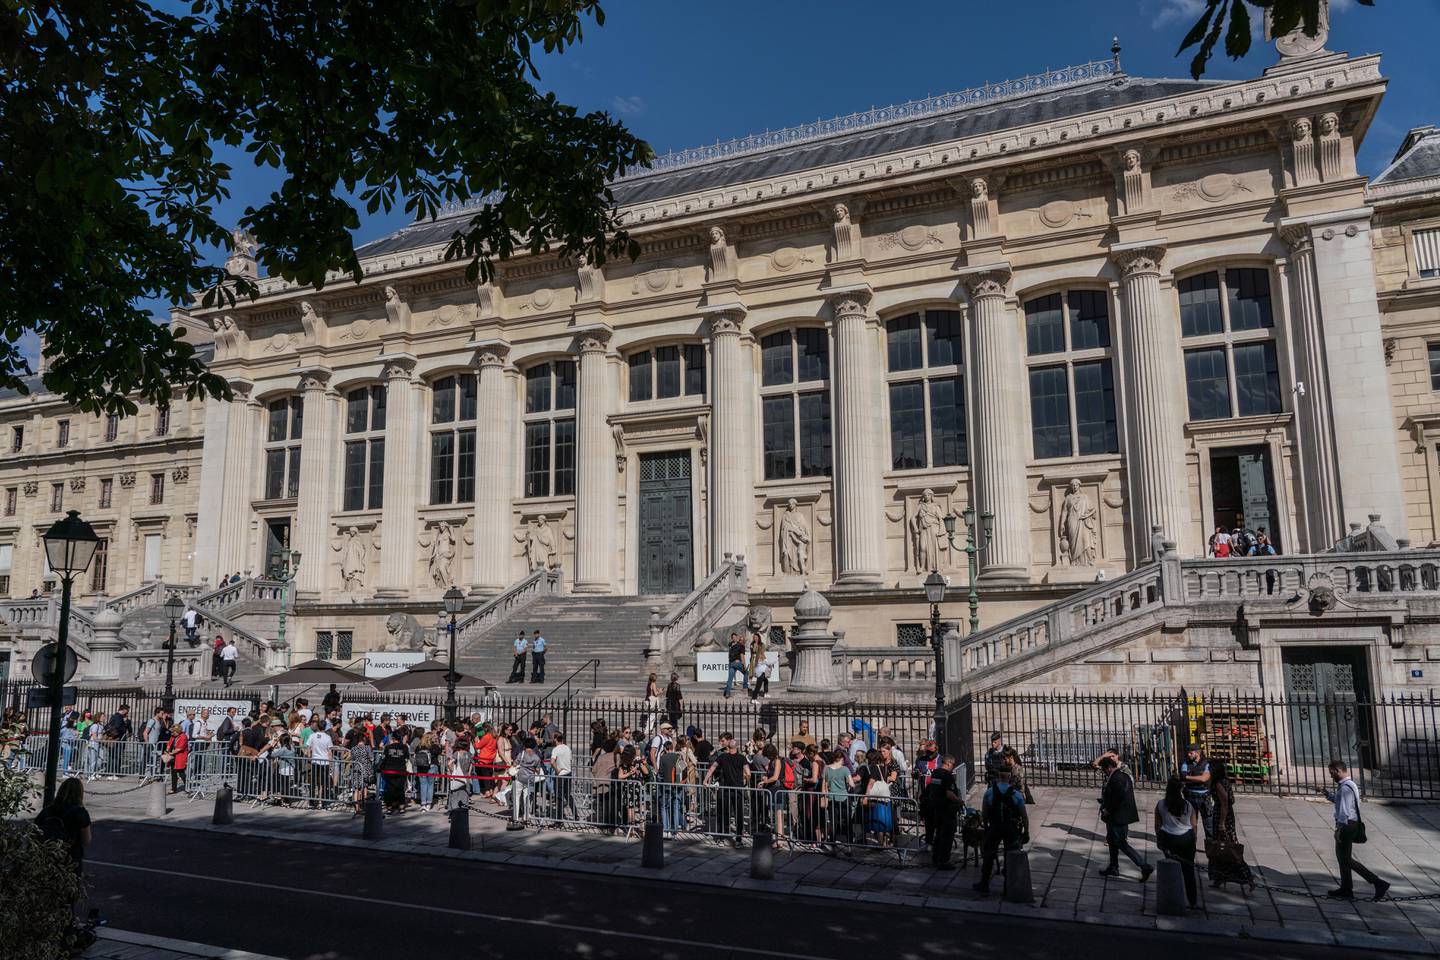 Families of victims, journalists, and lawyers attend the Palais de Justice in Paris.